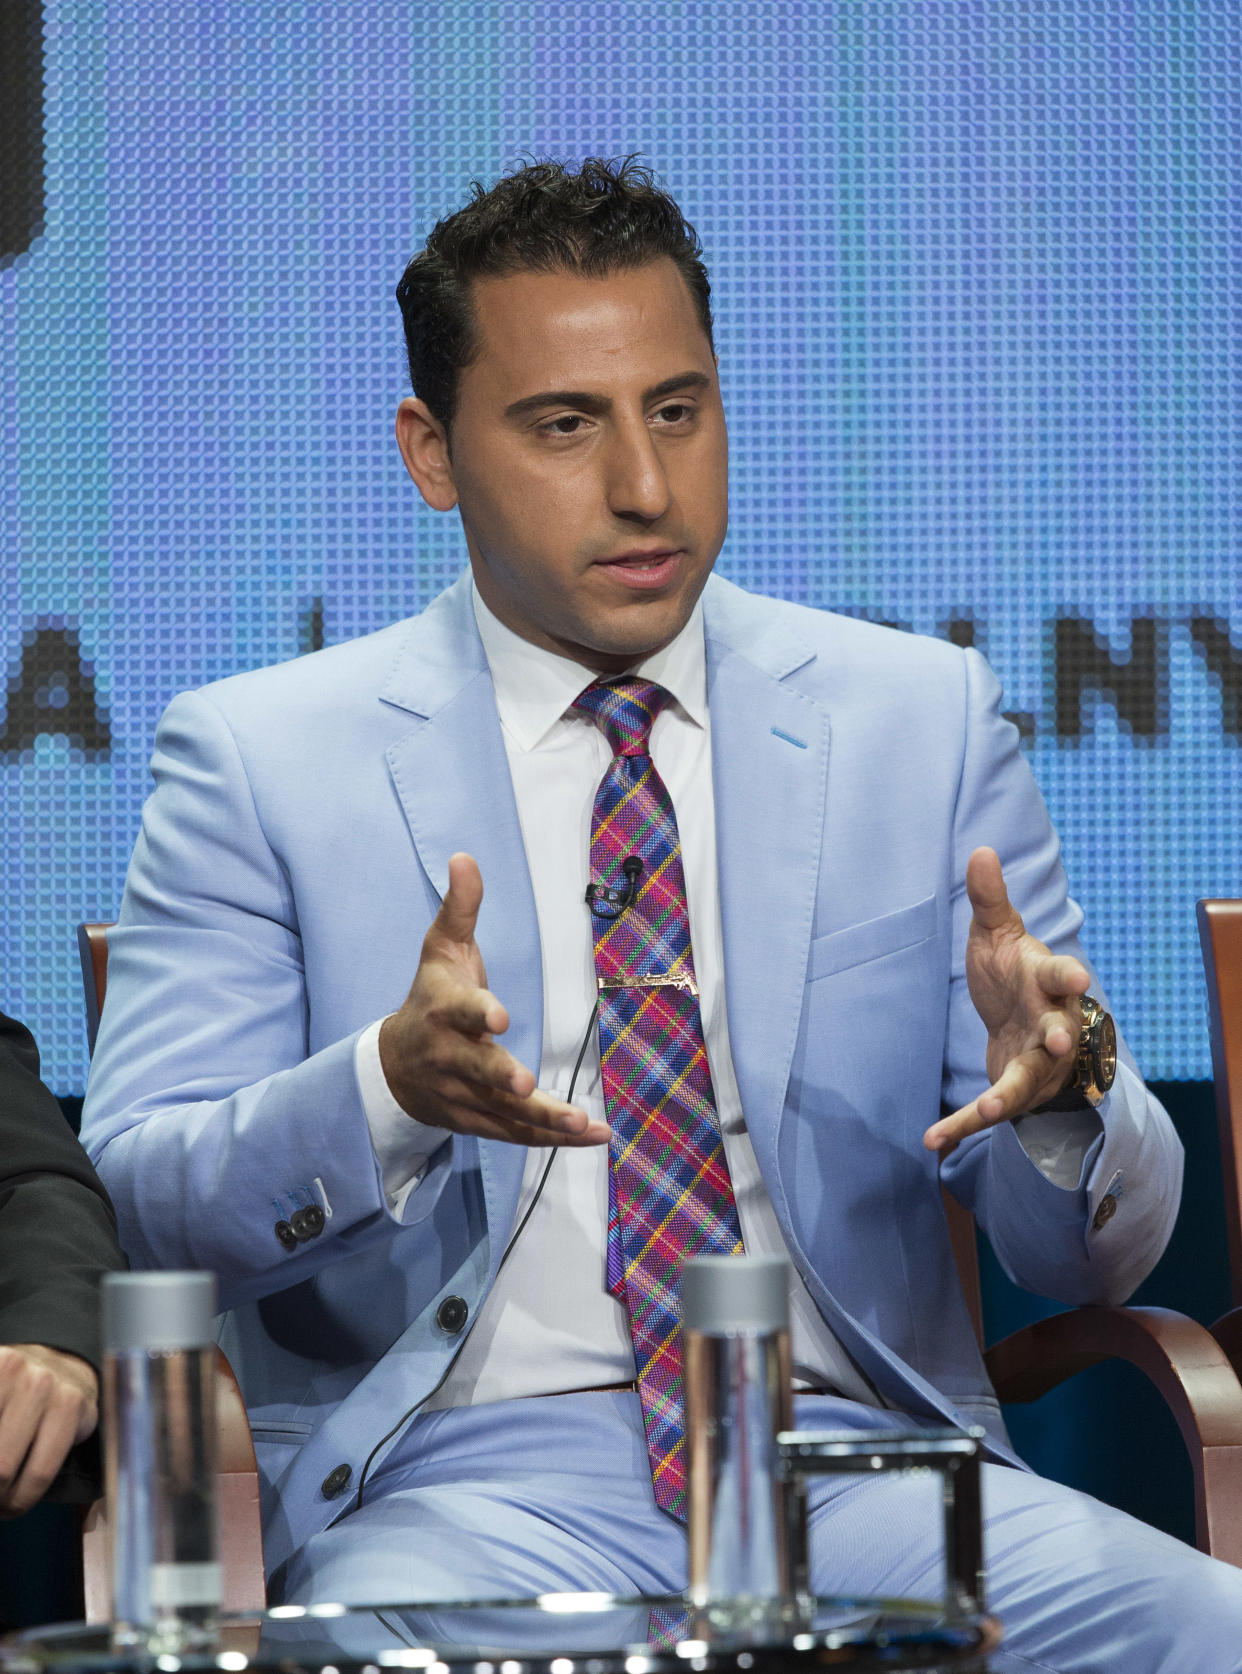 Real estate agent Josh Altman speaks at a panel for the Bravo television series 